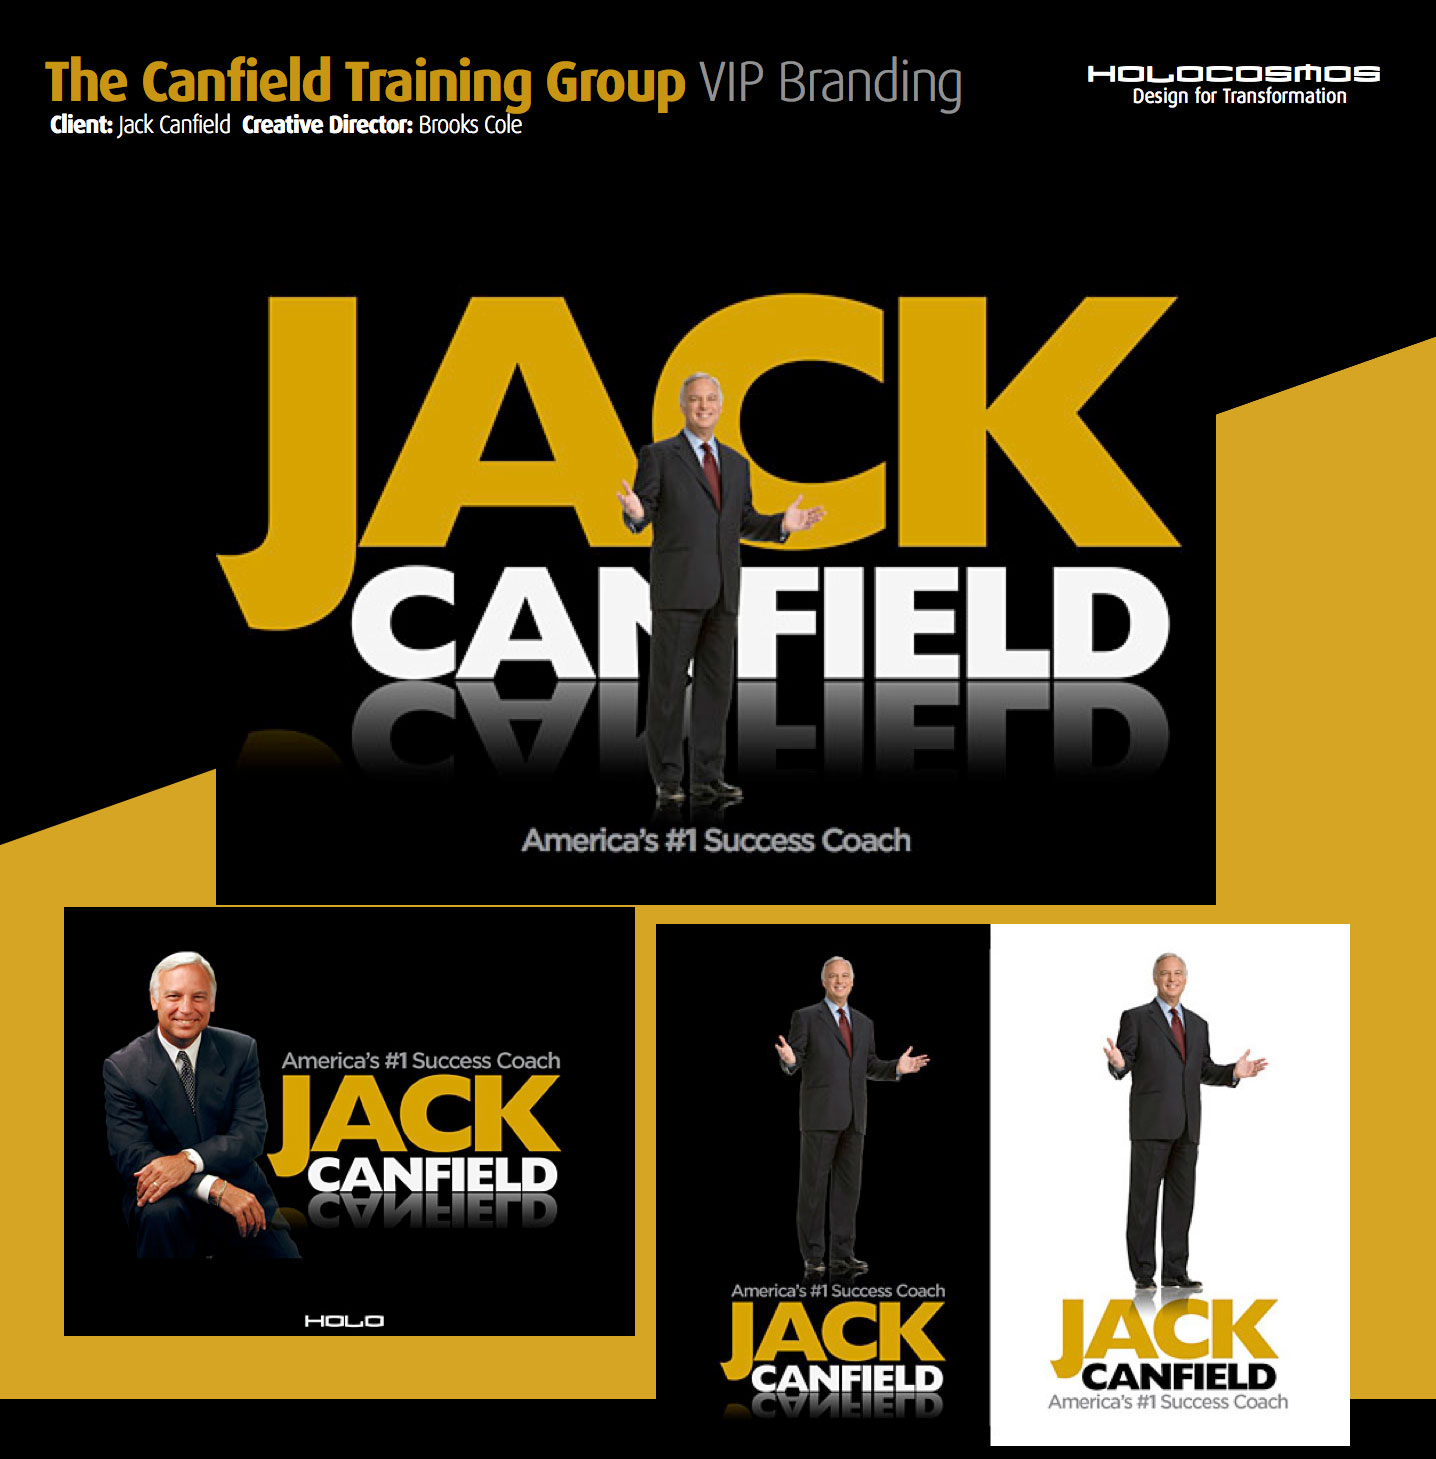 Jack Canfield Corporate Branding by HoloCosmos